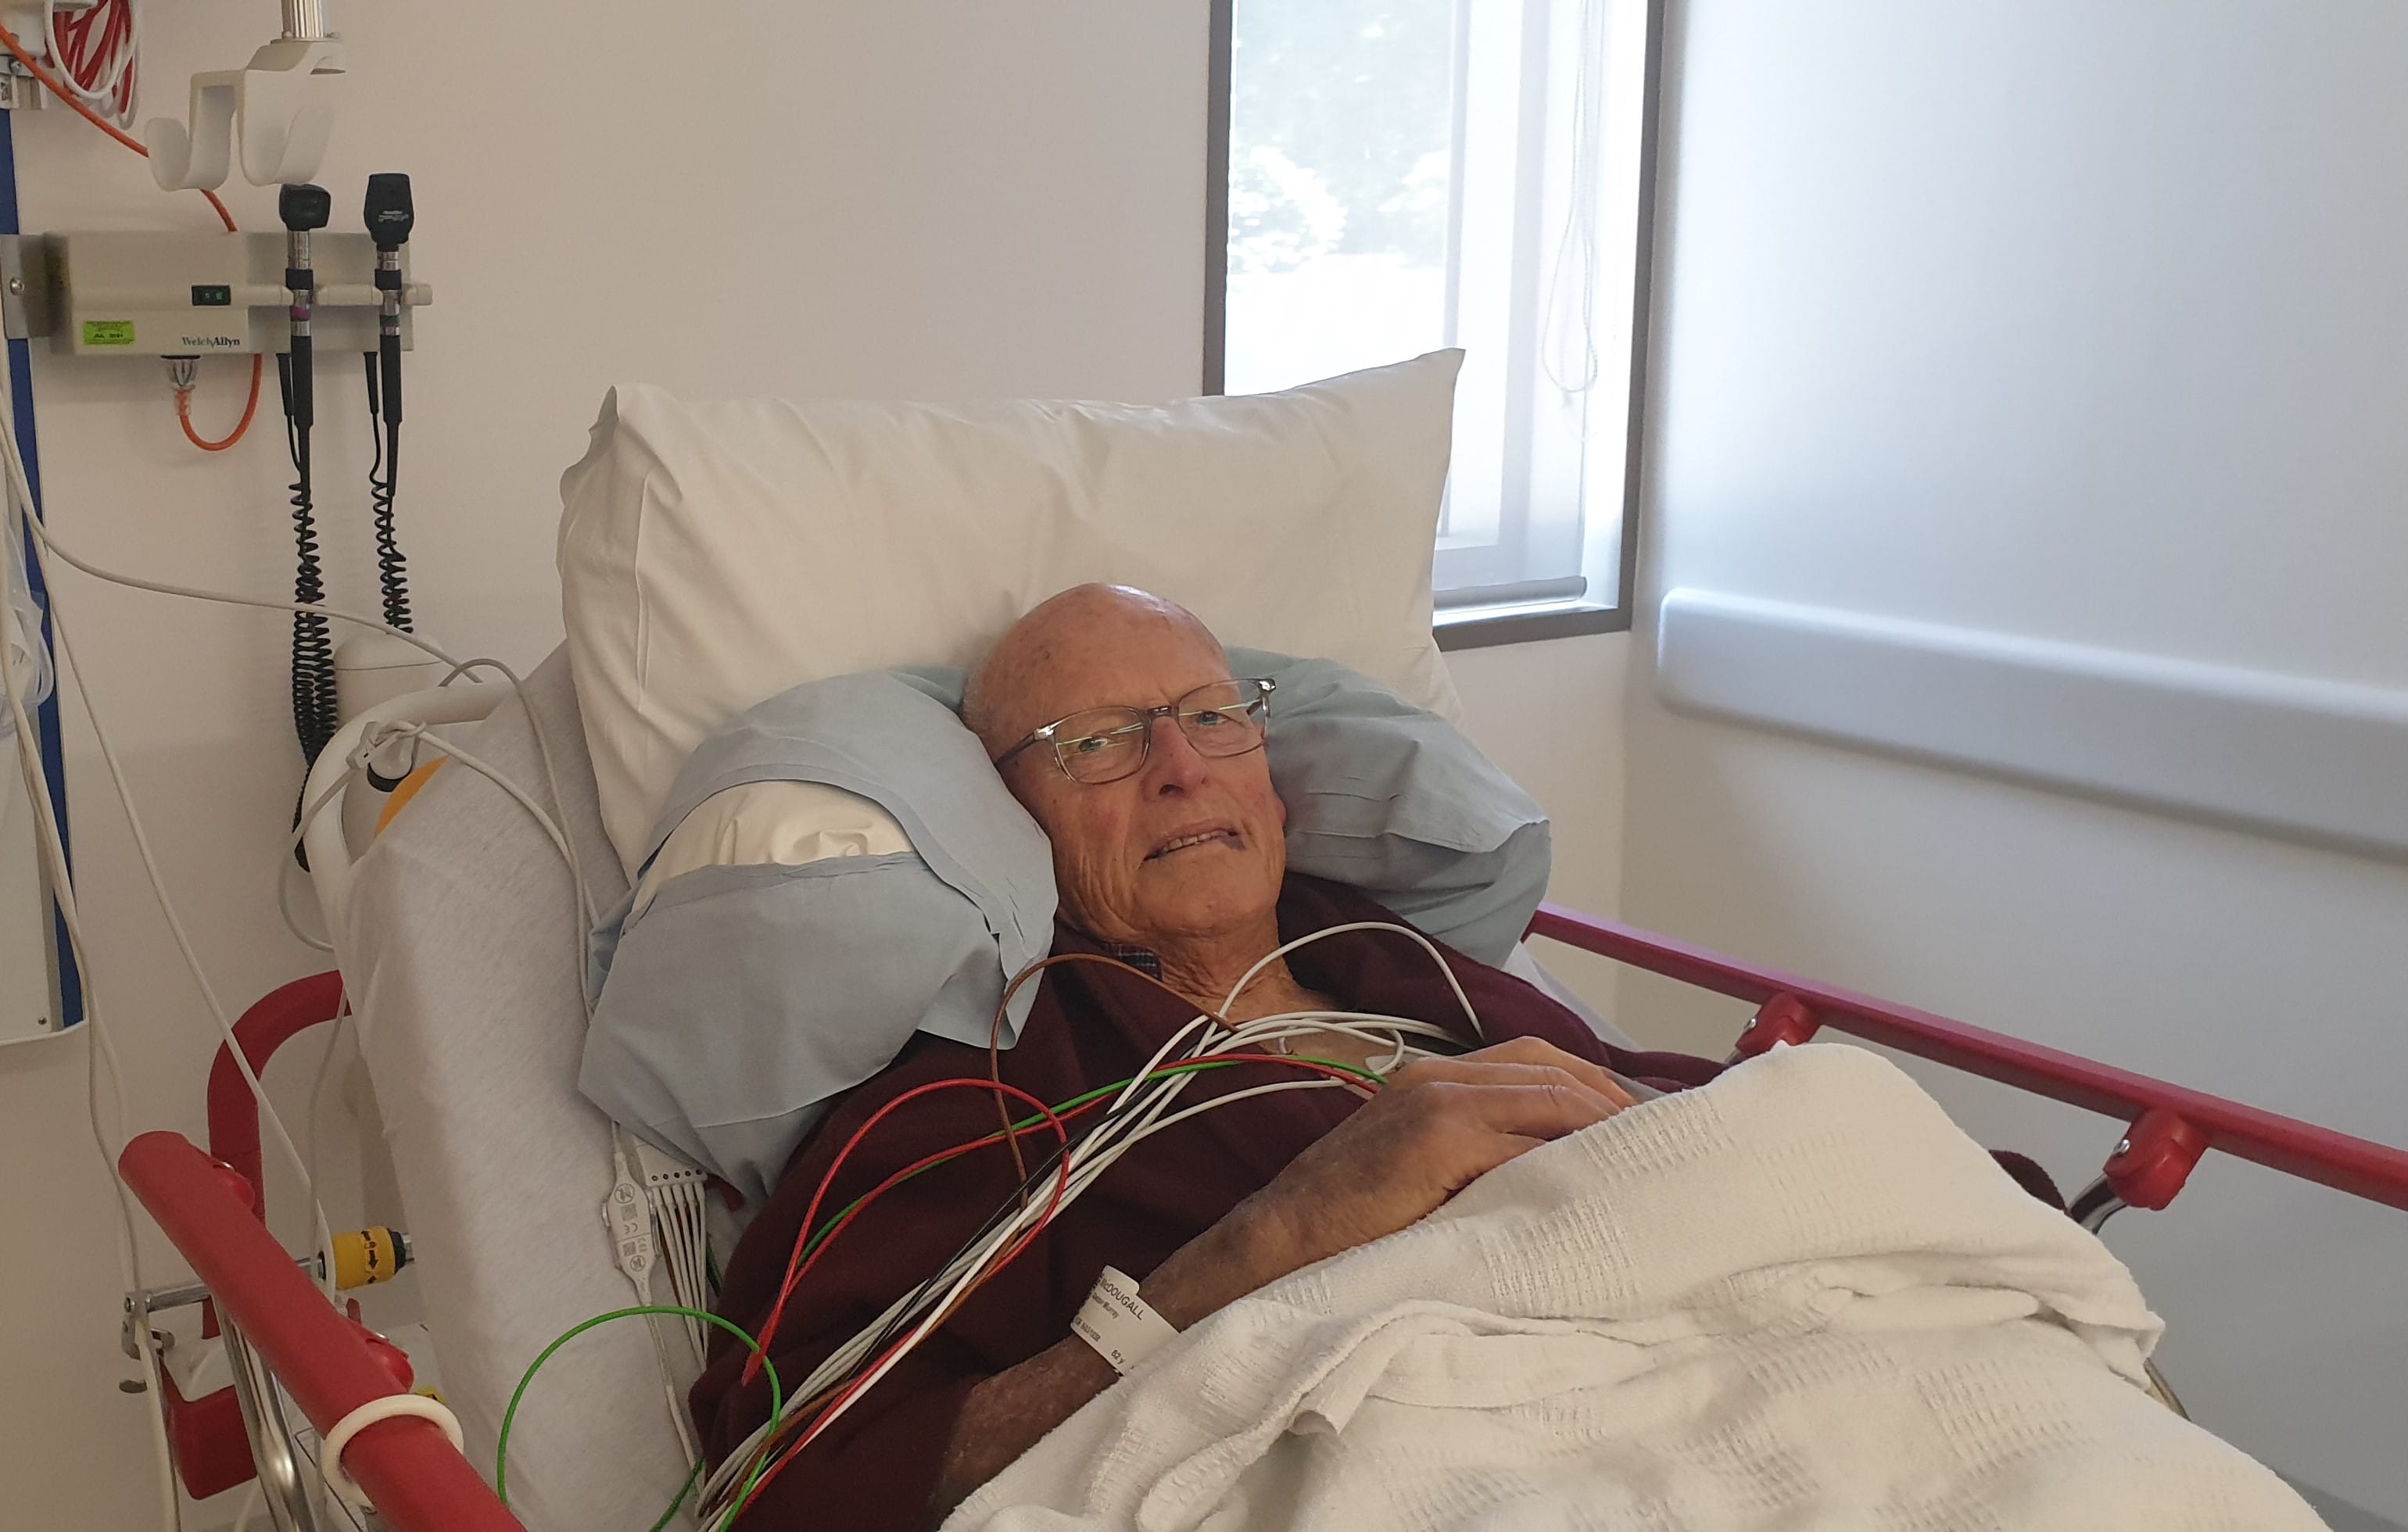 Alastair McDougall, who suffered a stroke, has been moved into a new room in Waipapa.